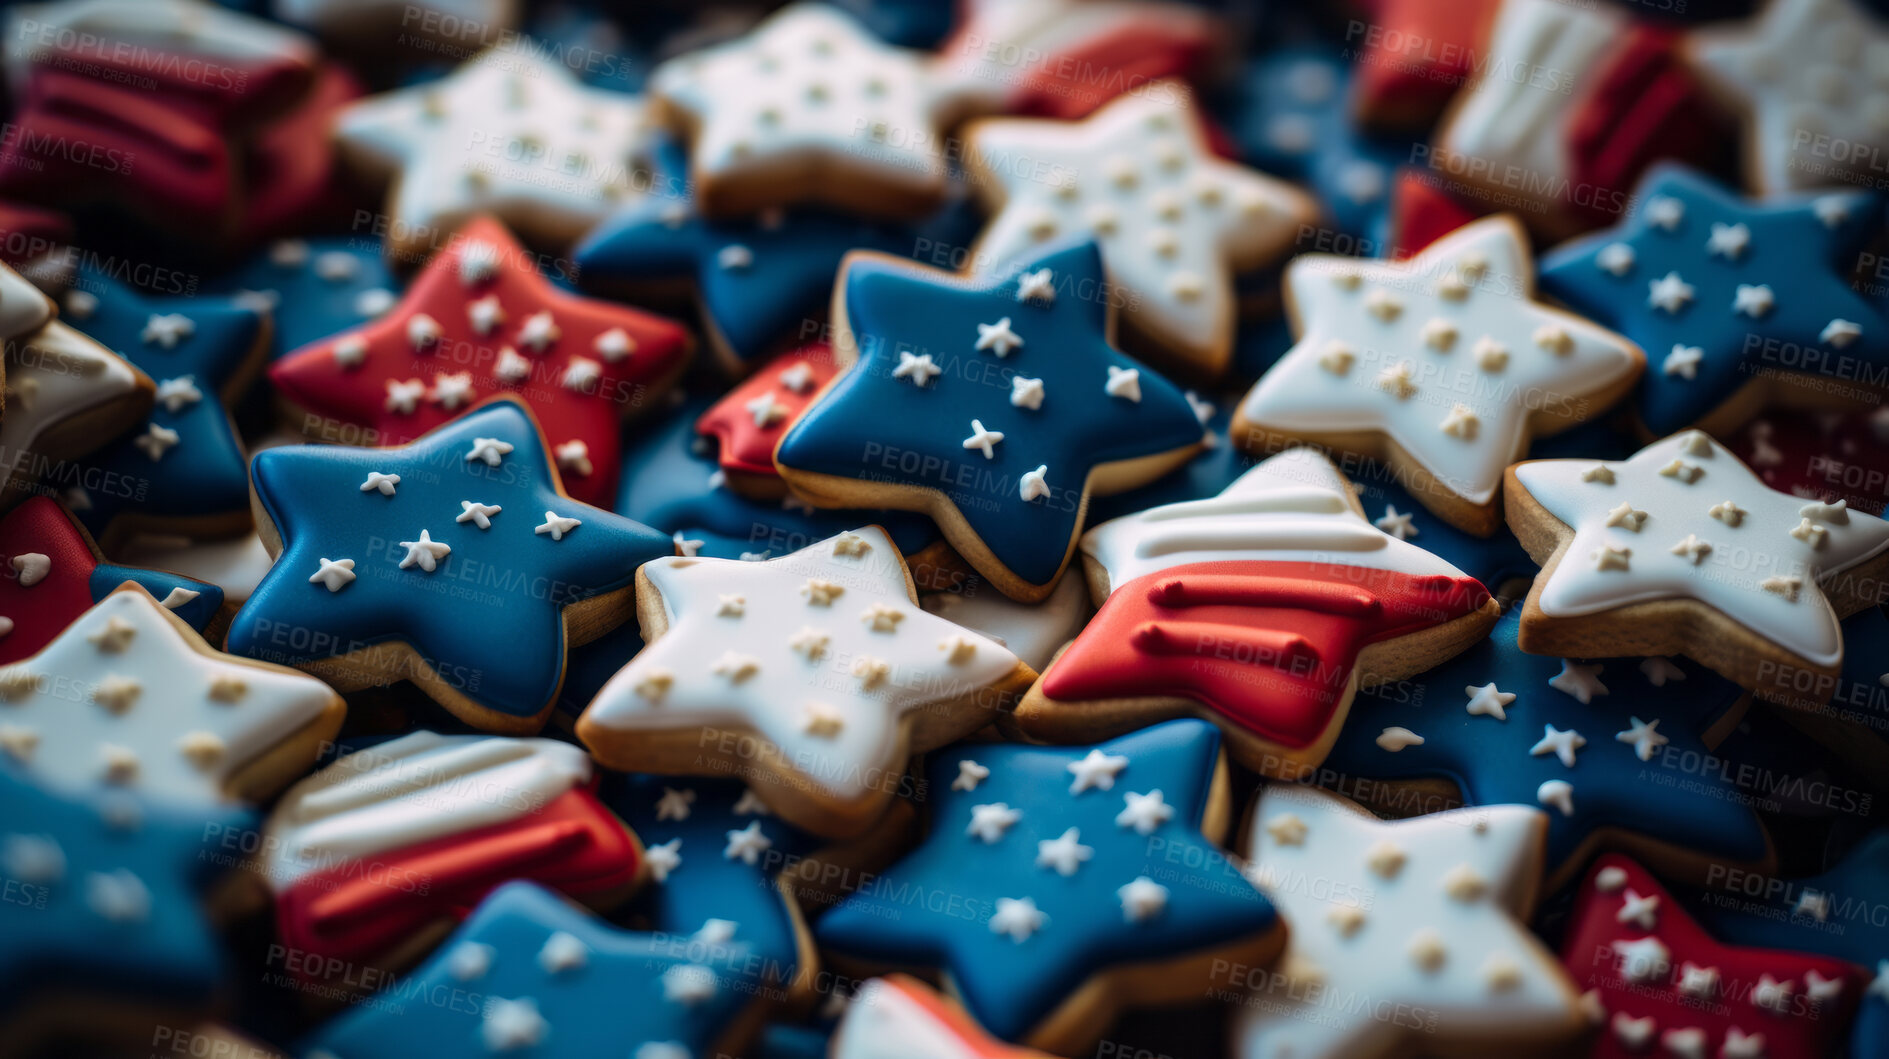 Buy stock photo Close-up shot of Star shaped cookies decorated for American patriotism.